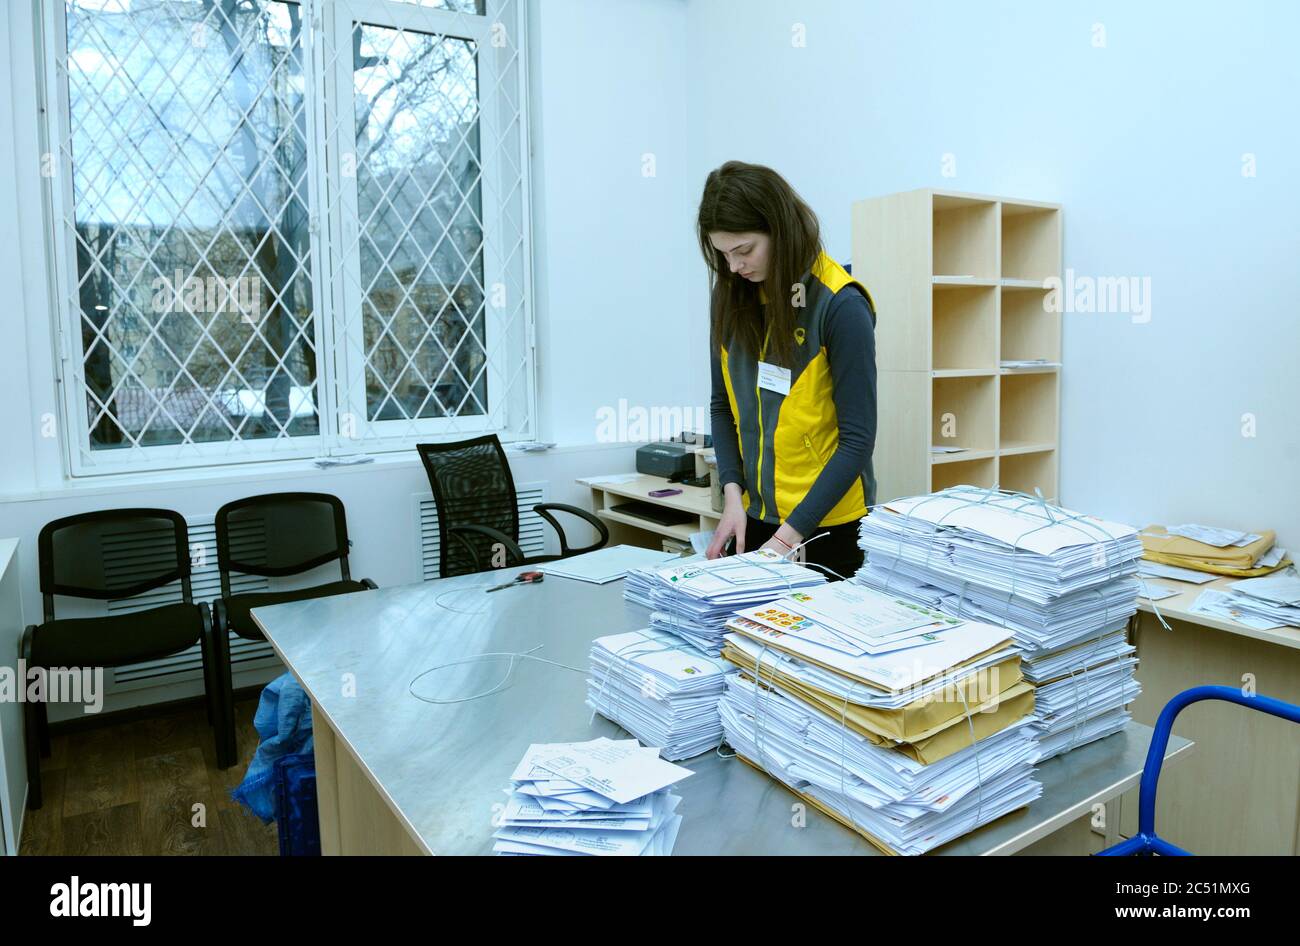 At the post office, sorting room: female postal worker in uniform sorting letters and parcels standing at the work table Stock Photo